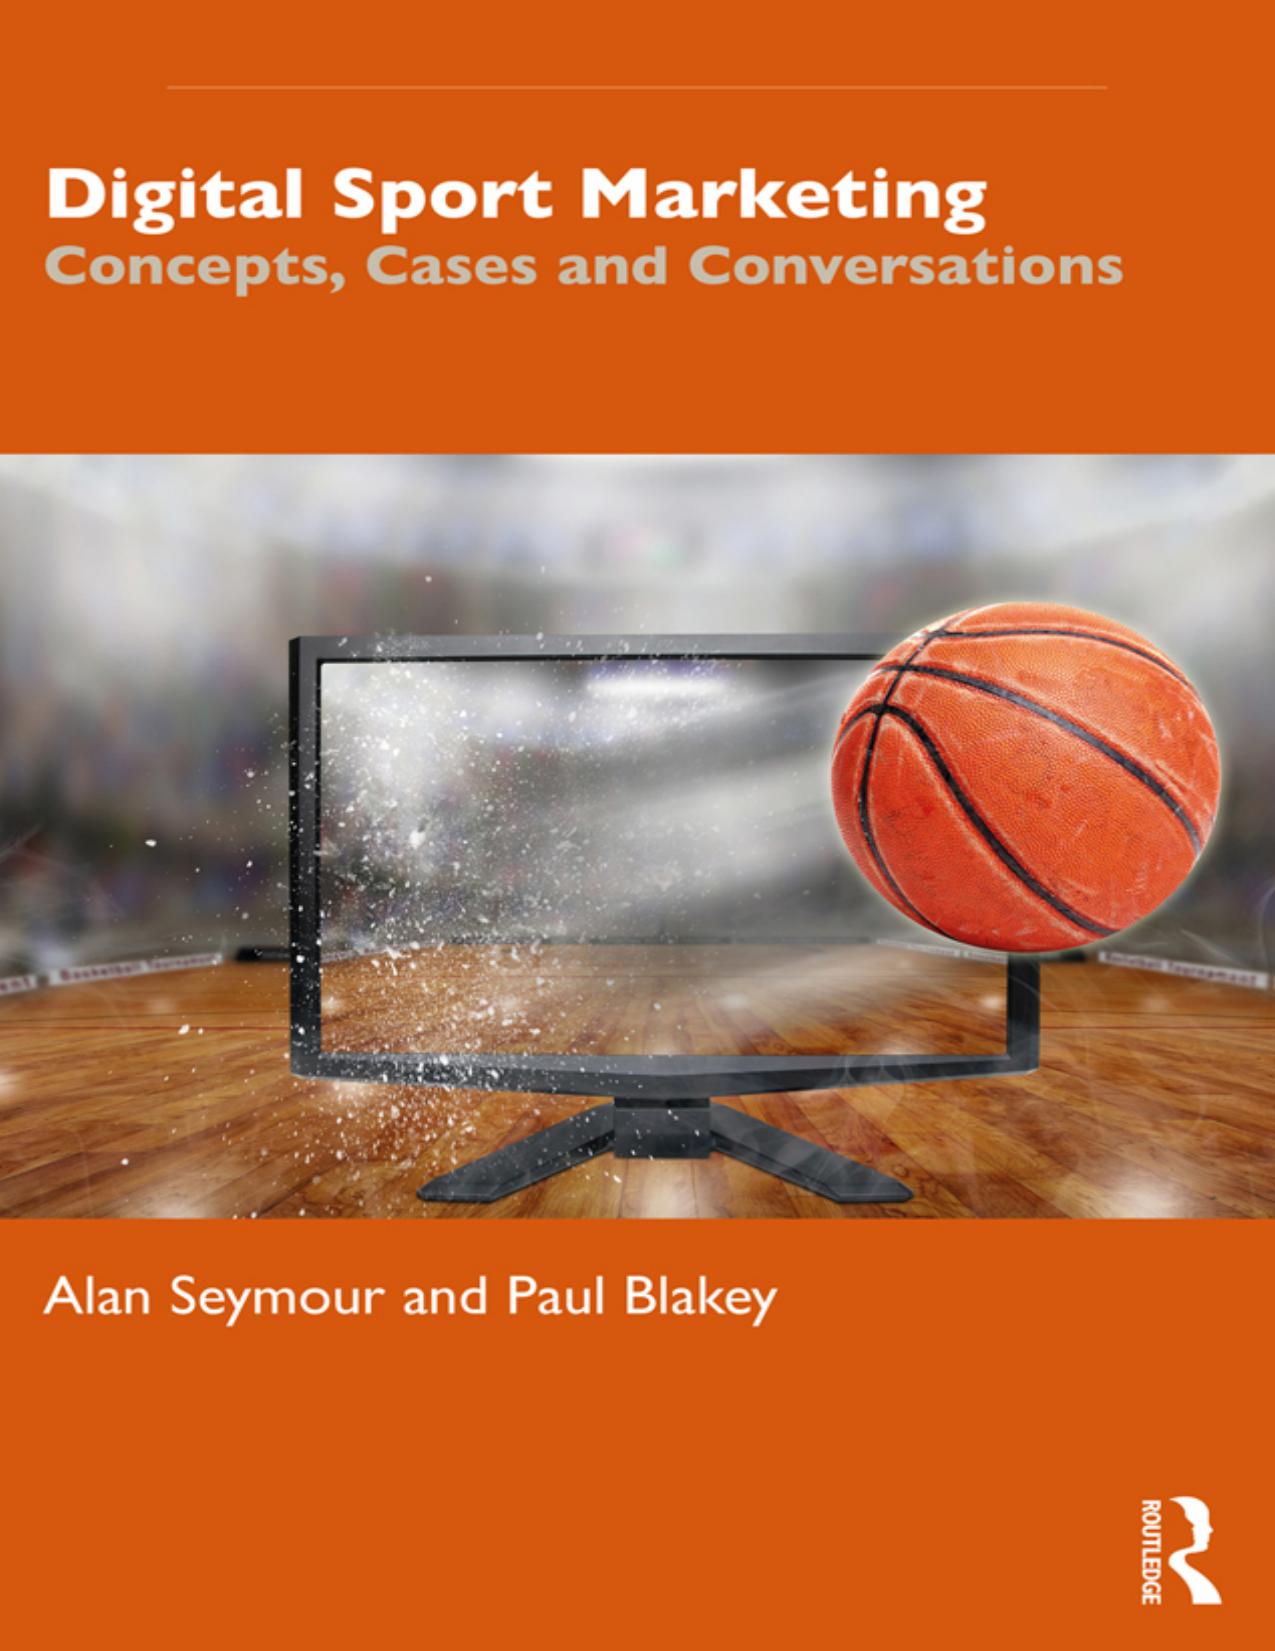 Digital Sport Marketing: Concepts, Cases and Conversations by Alan Seymour Paul Blakey